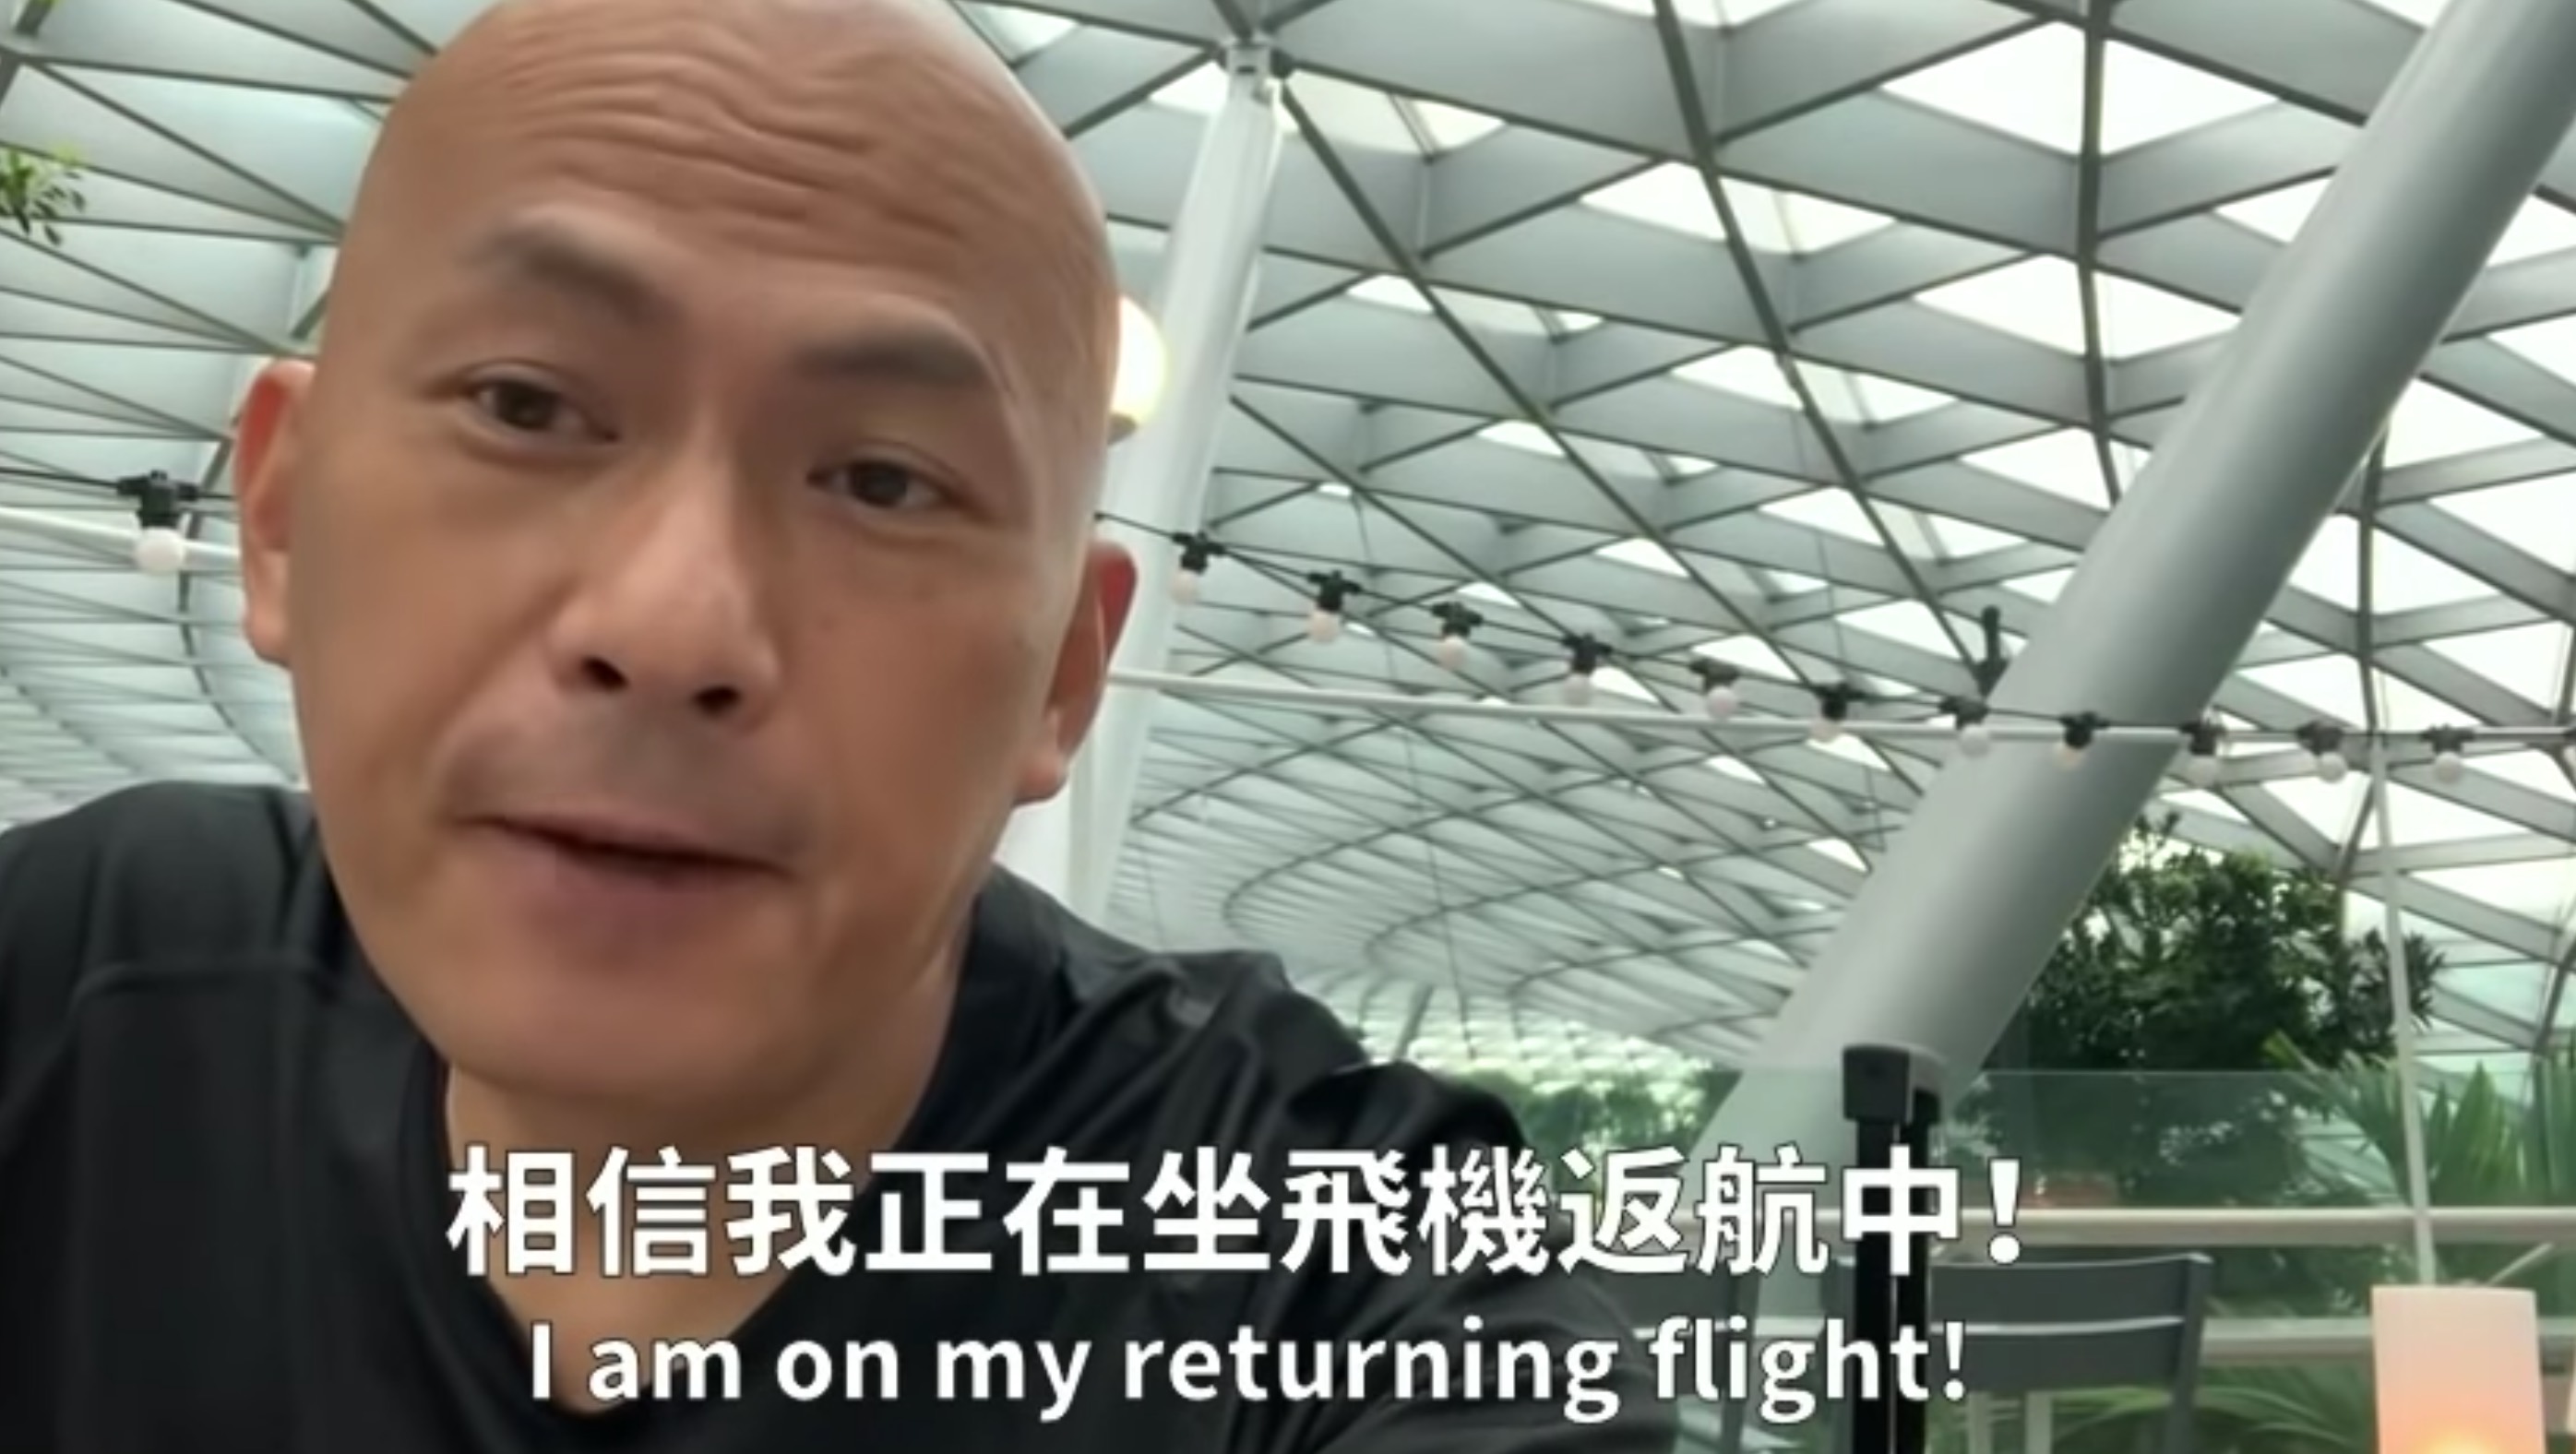 Hong Kong YouTuber Alex Yeung speaks about his deportation from Singapore in a video filmed at Jewel Changi Airport. Screengrab via YouTube.